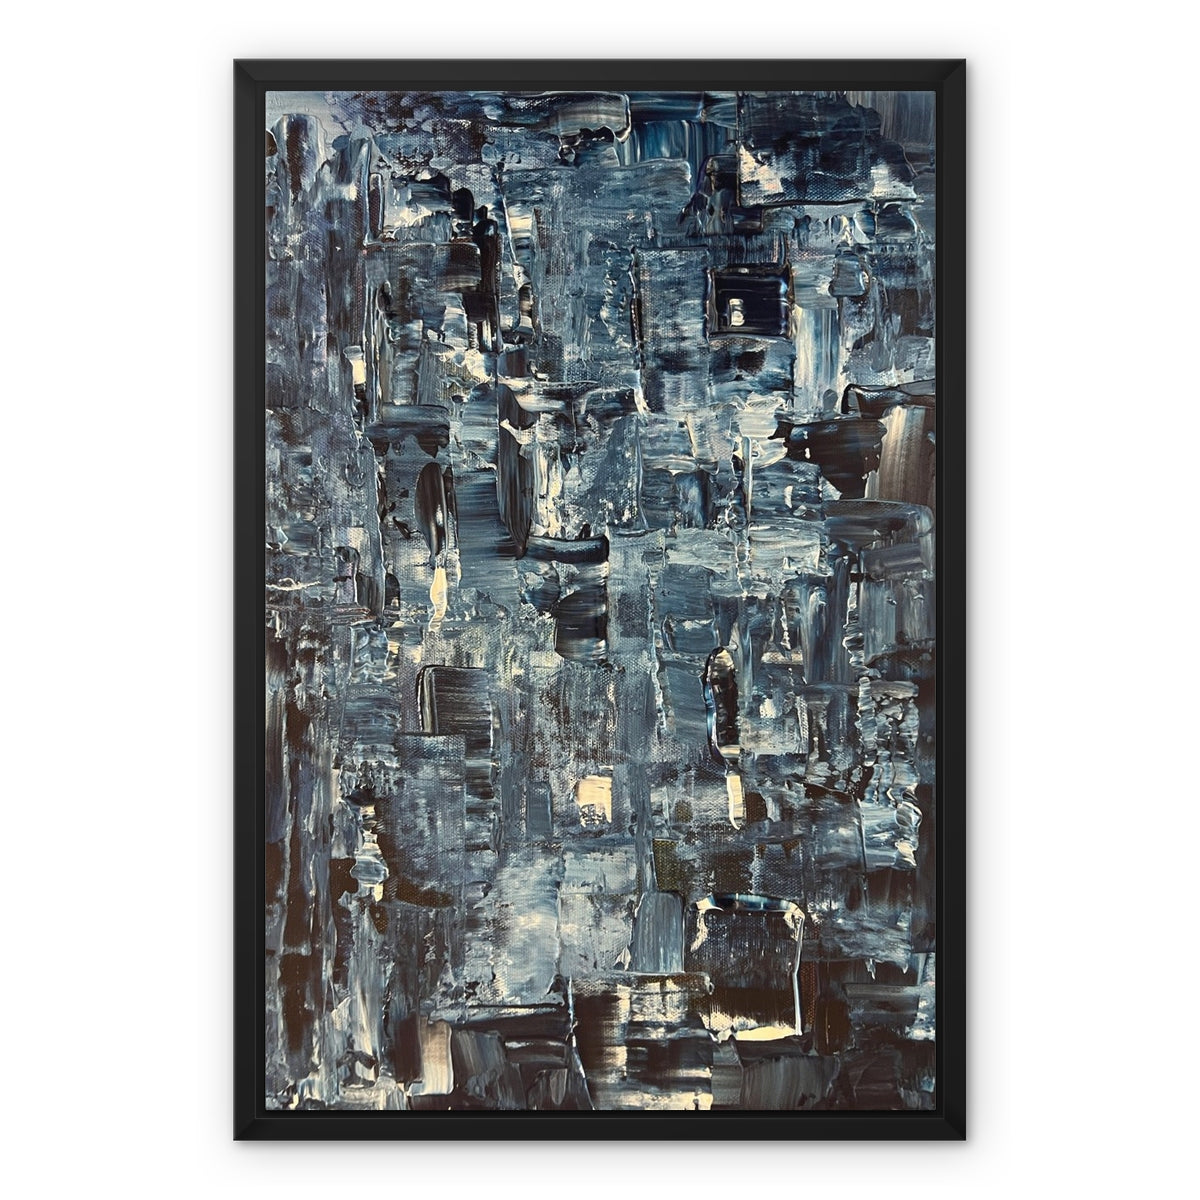 Inception Abstract Painting | Framed Canvas From Scotland-Floating Framed Canvas Prints-Abstract & Impressionistic Art Gallery-18"x24"-Paintings, Prints, Homeware, Art Gifts From Scotland By Scottish Artist Kevin Hunter